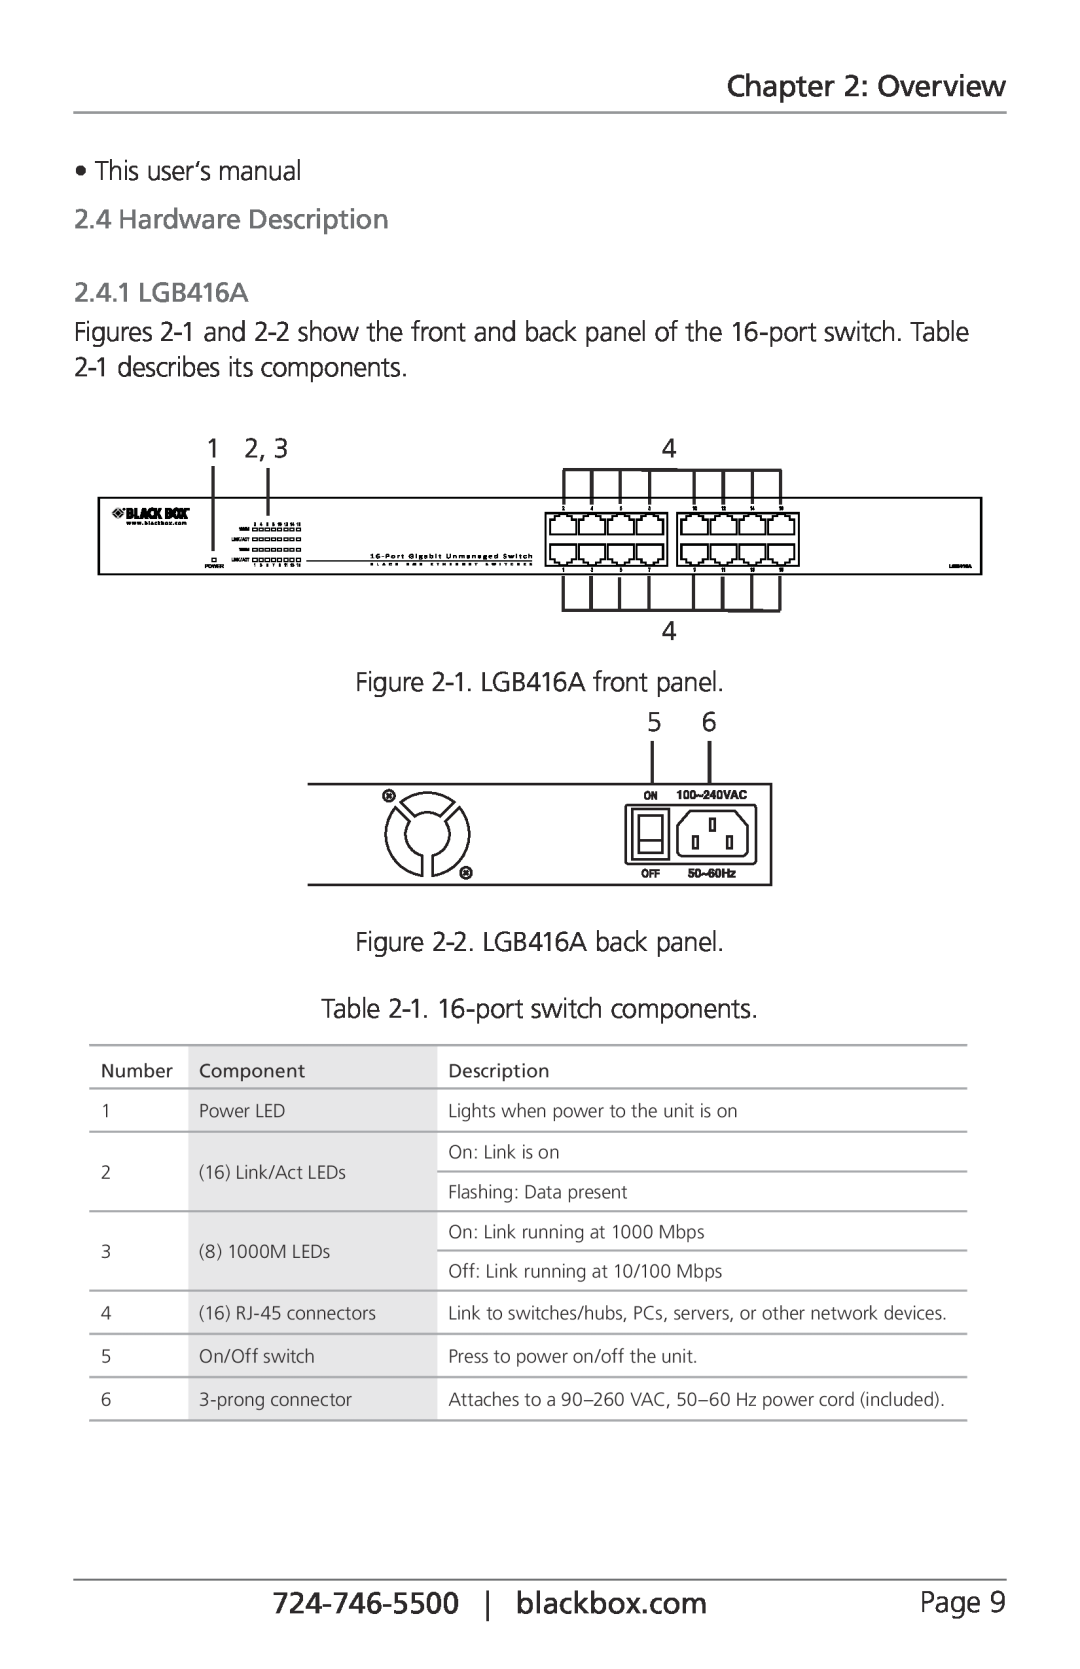 Black Box LGB424A Overview, This user‘s manual, Hardware Description 2.4.1 LGB416A, 2.LGB416A back panel, Page 